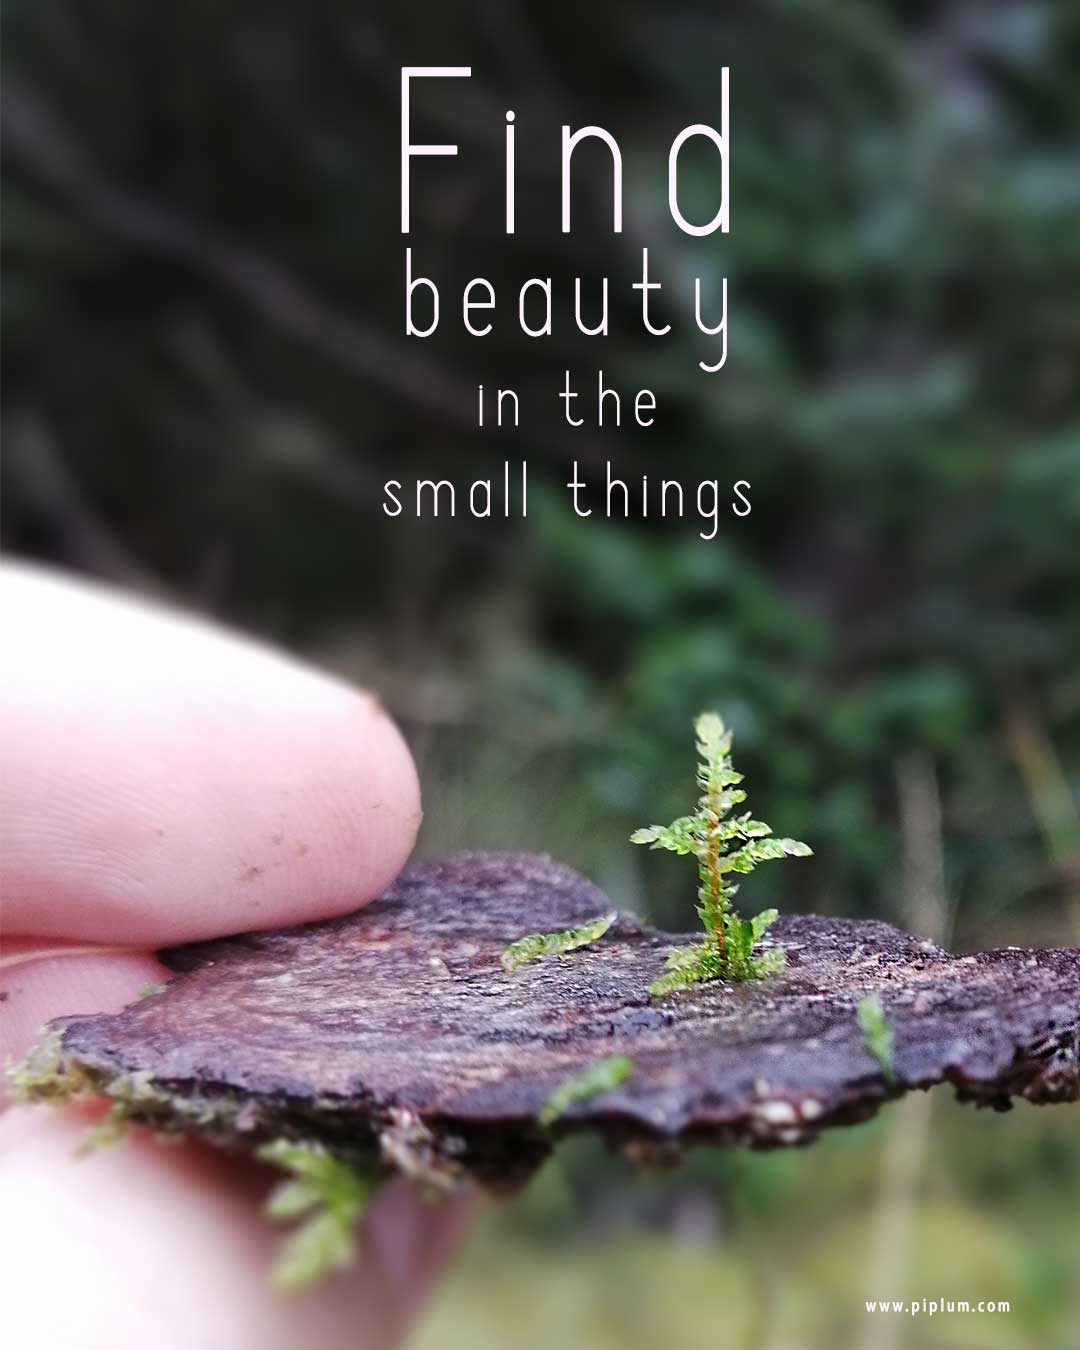 find-beauty-in-the-small-things-inspirational-quote-piplum-eco-nature-natural